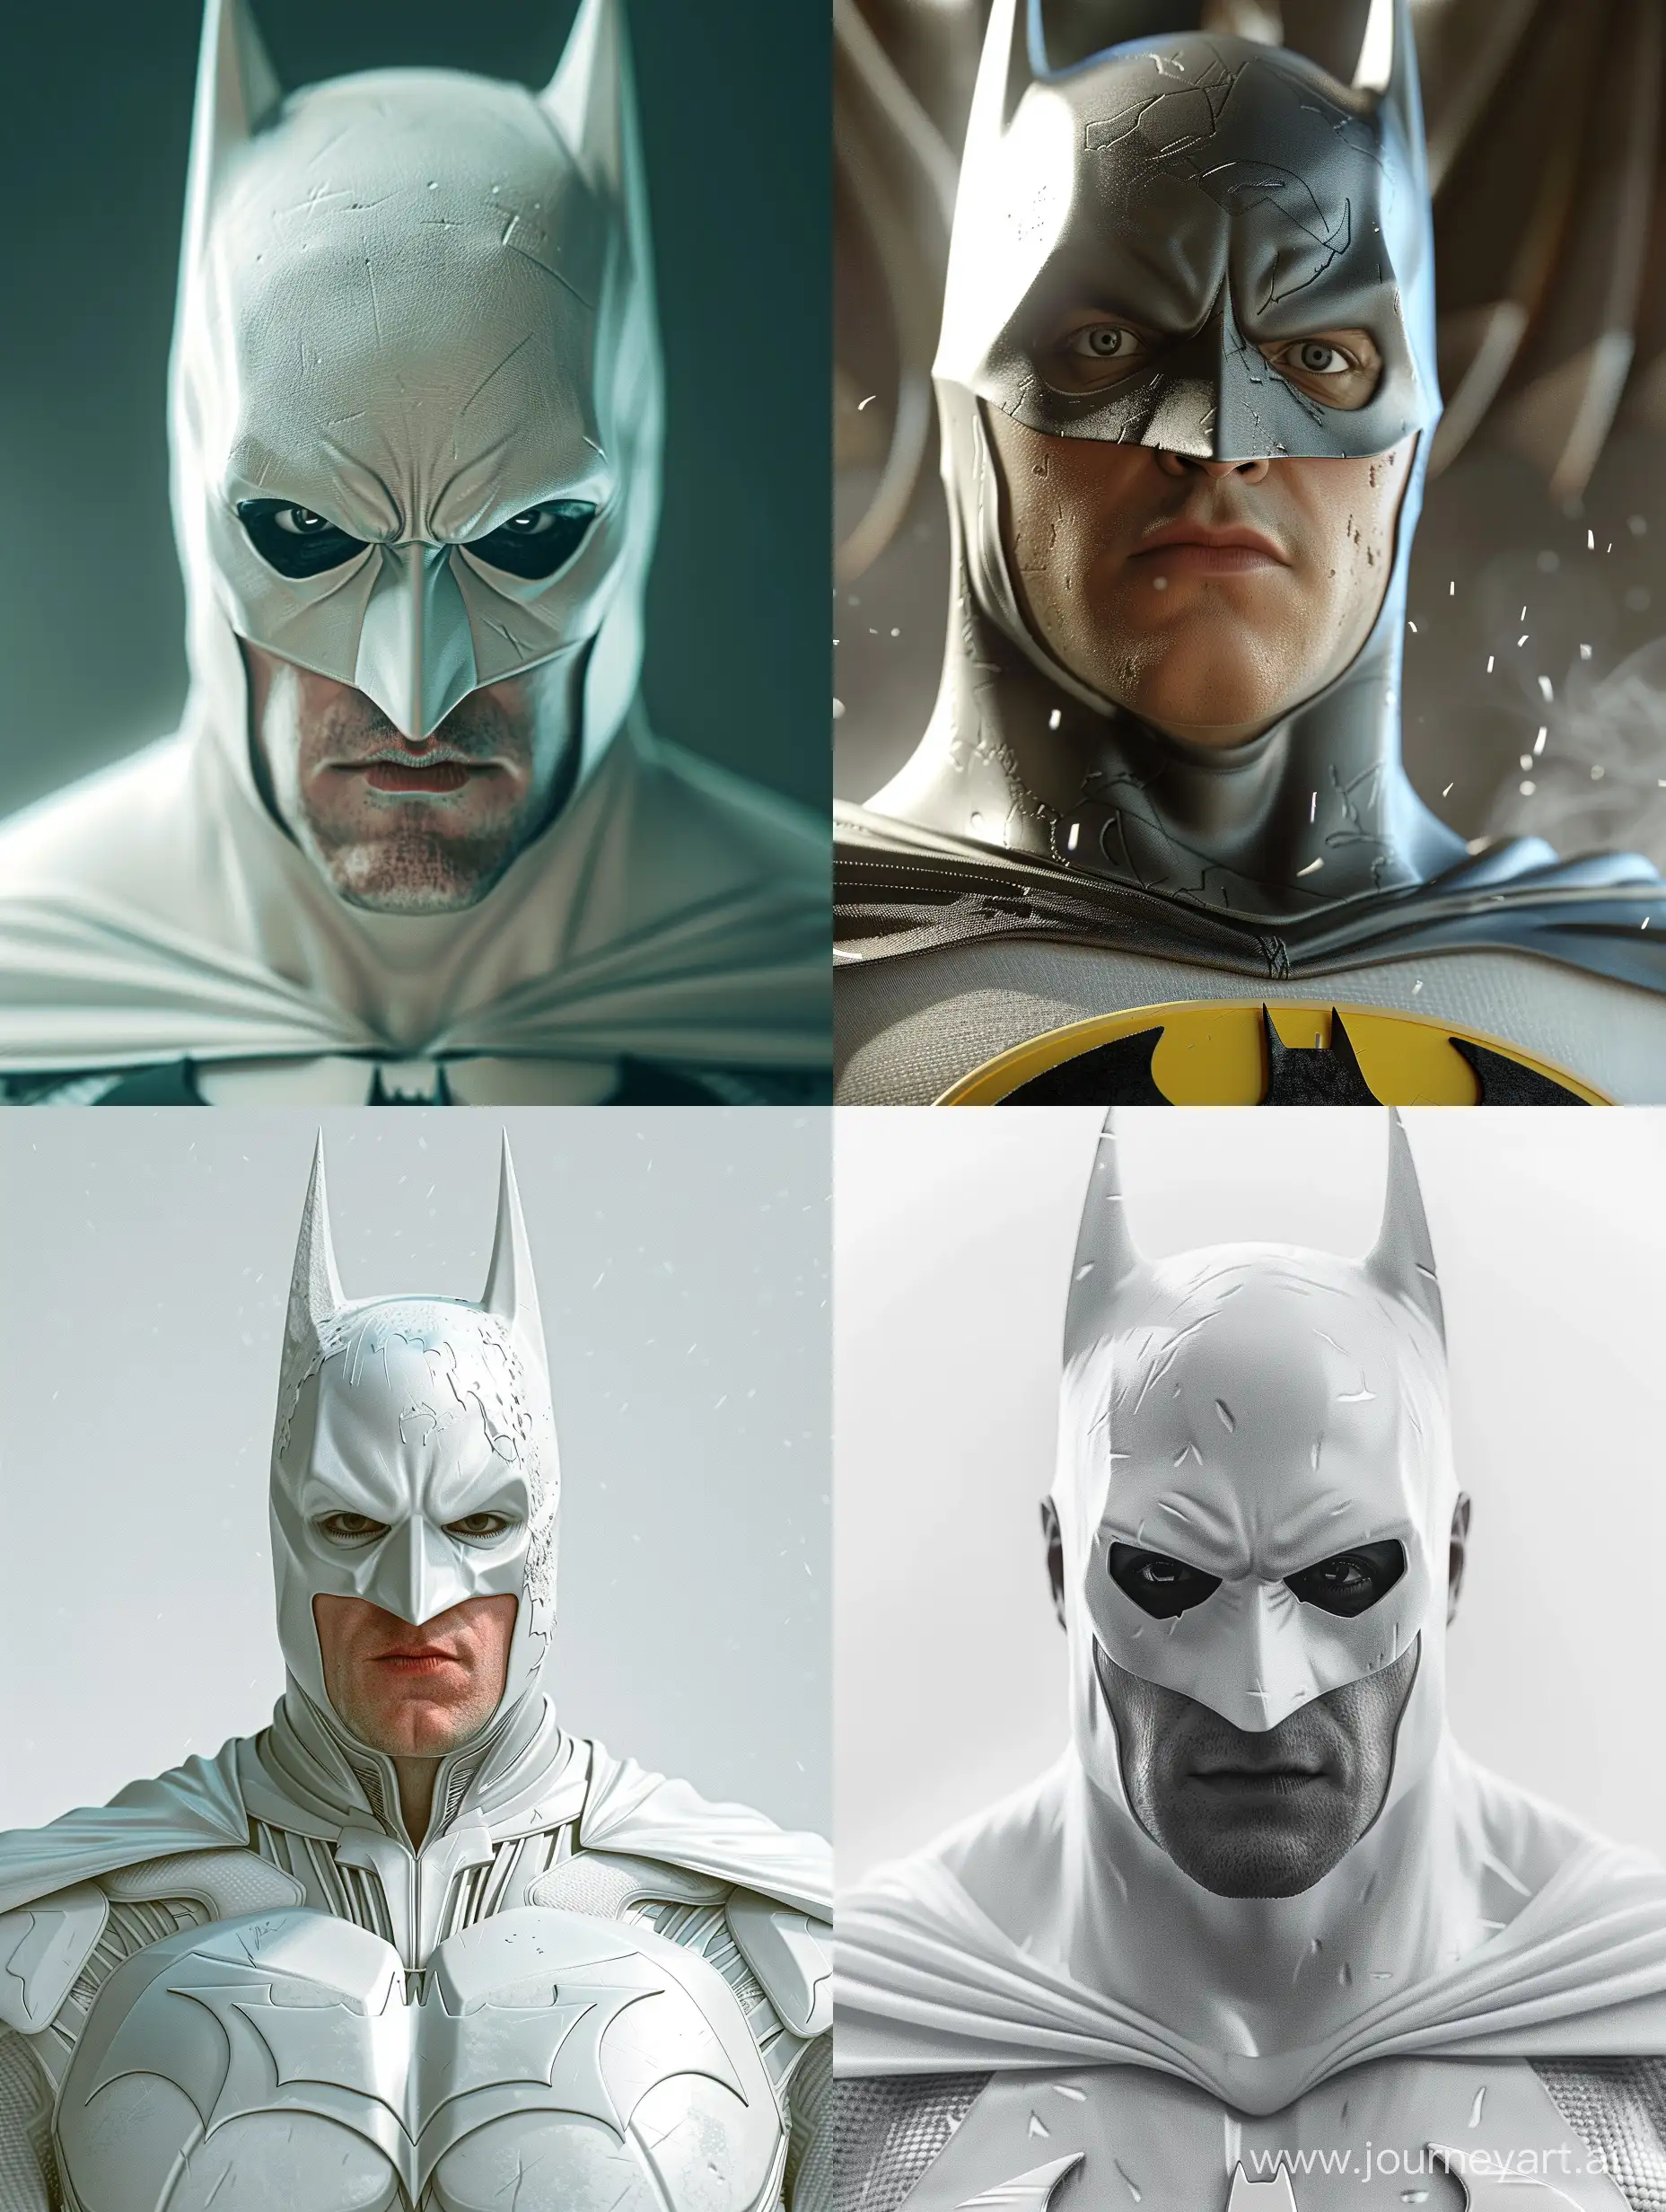 Christian Bale as Batman in White ultra-realistic, high resolution, with cinematic lighting